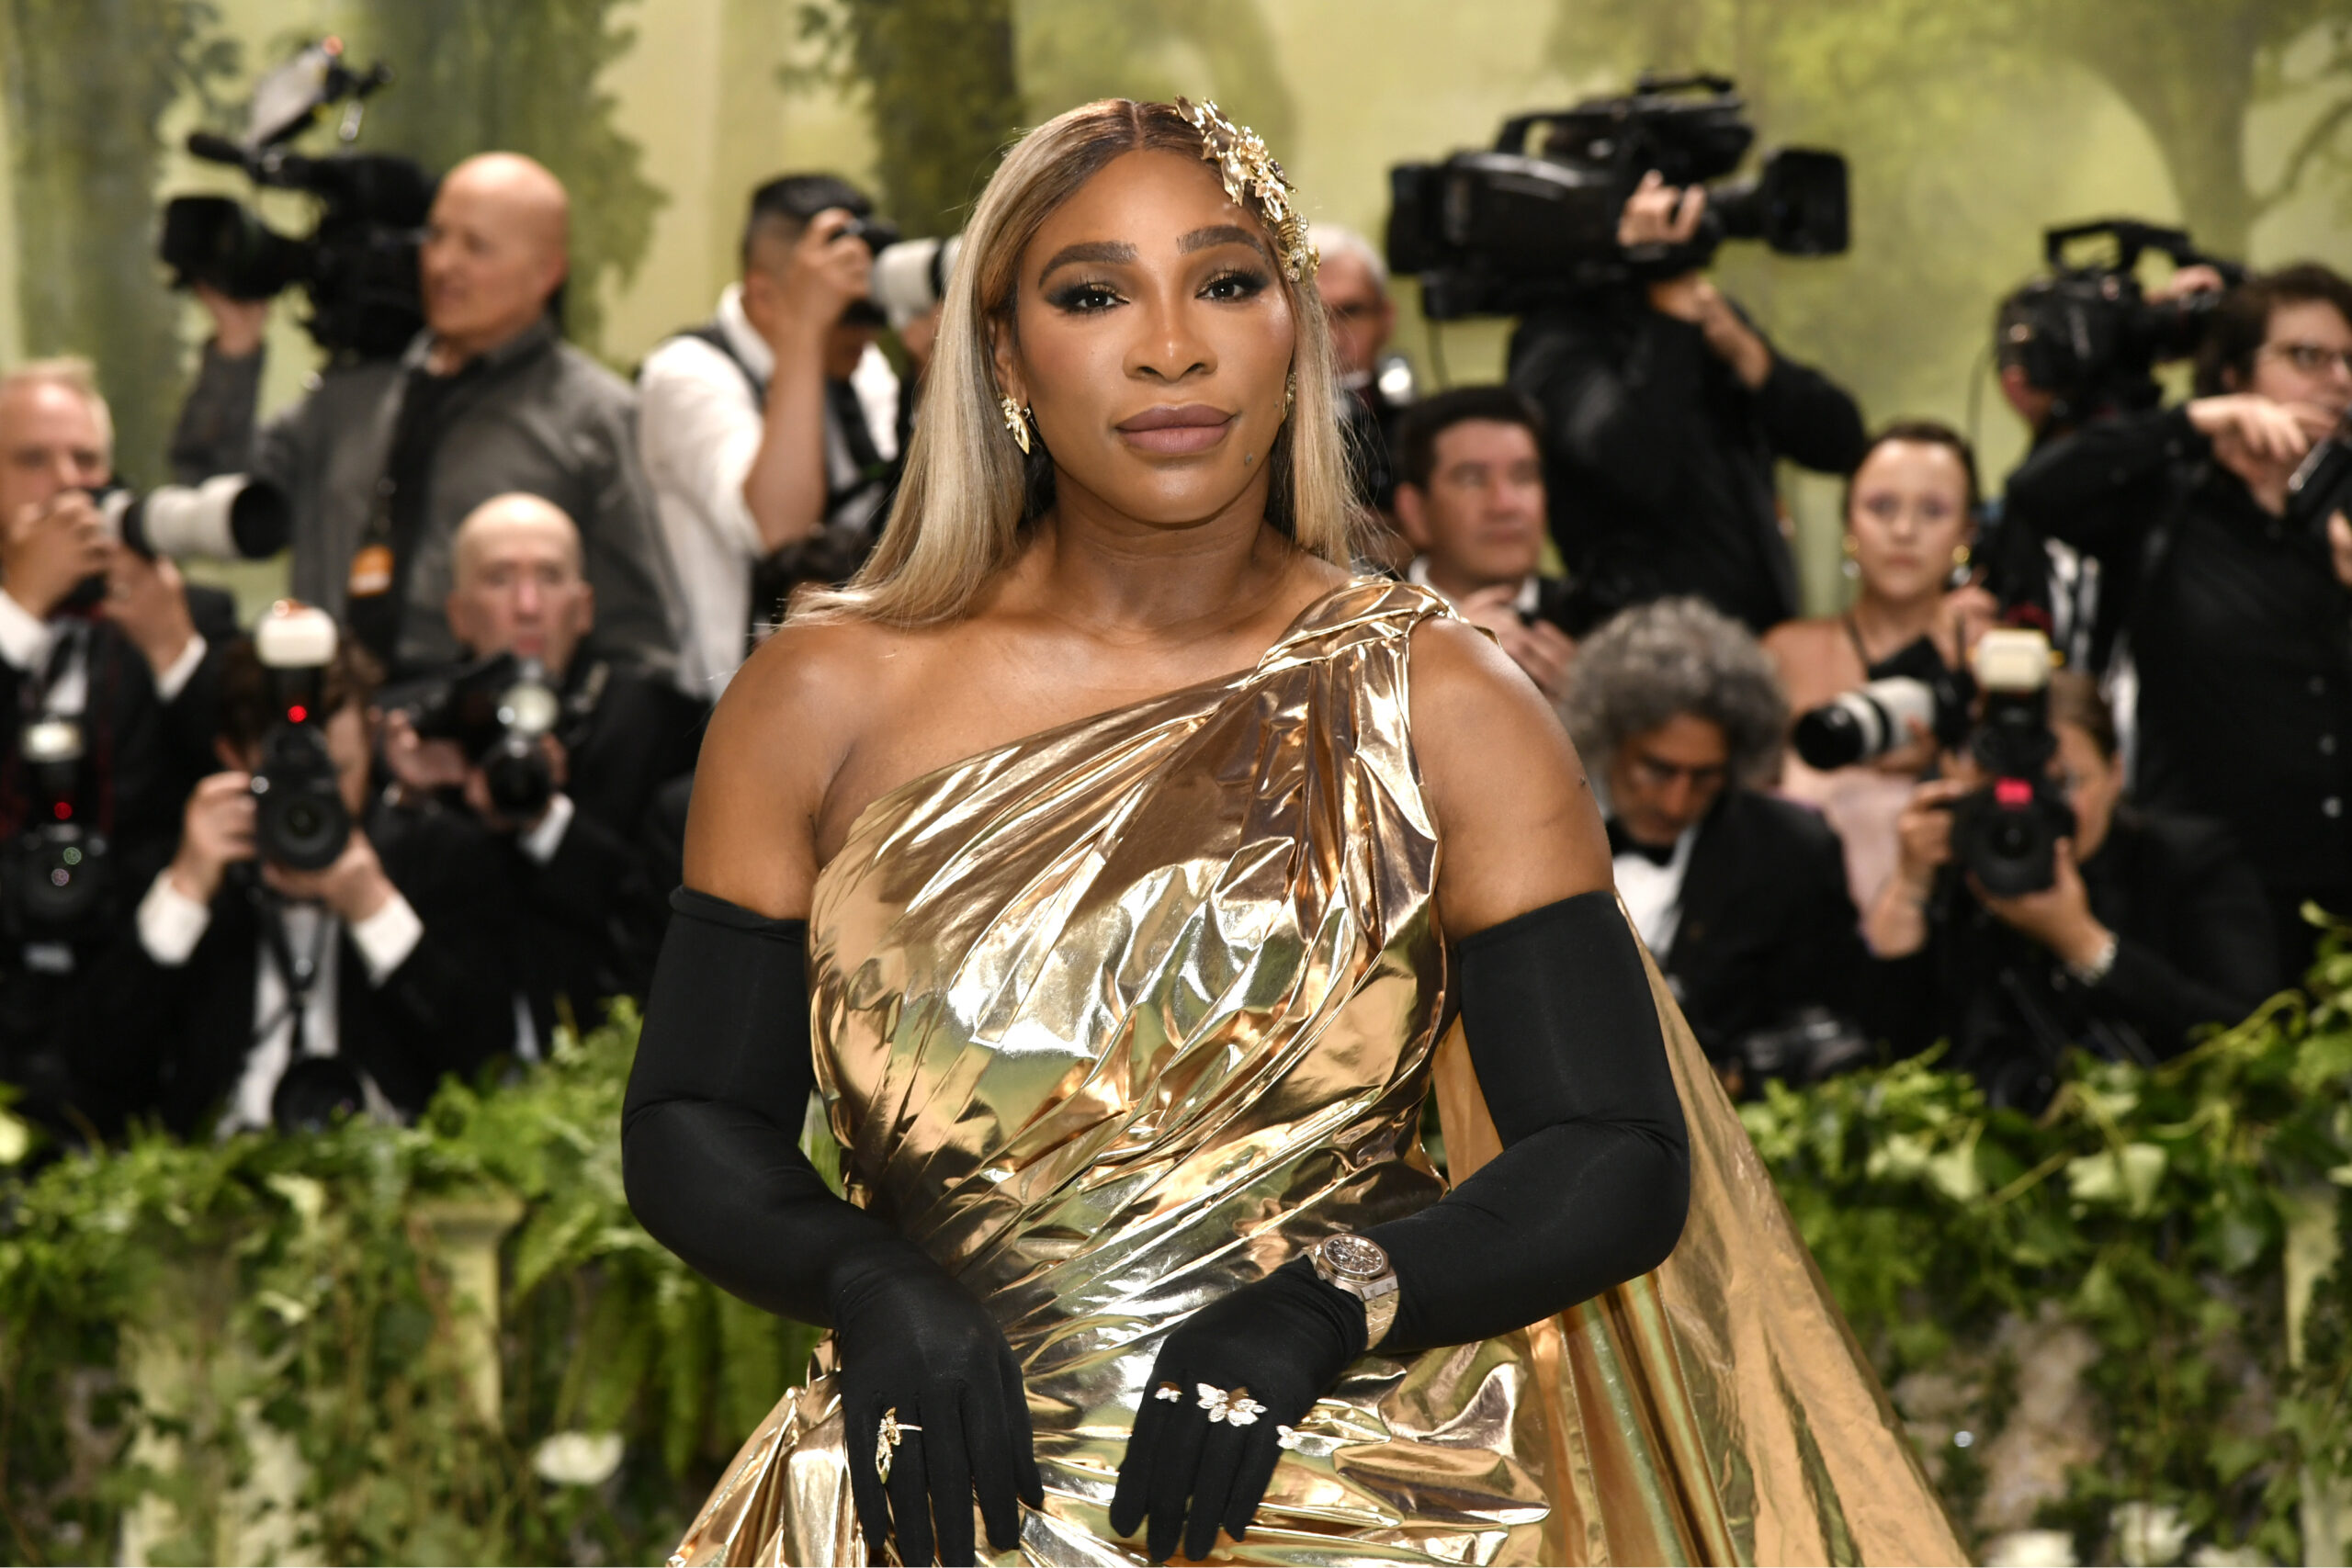 GALLERY: The Met Gala fashions were just as striking and beautiful as we hoped